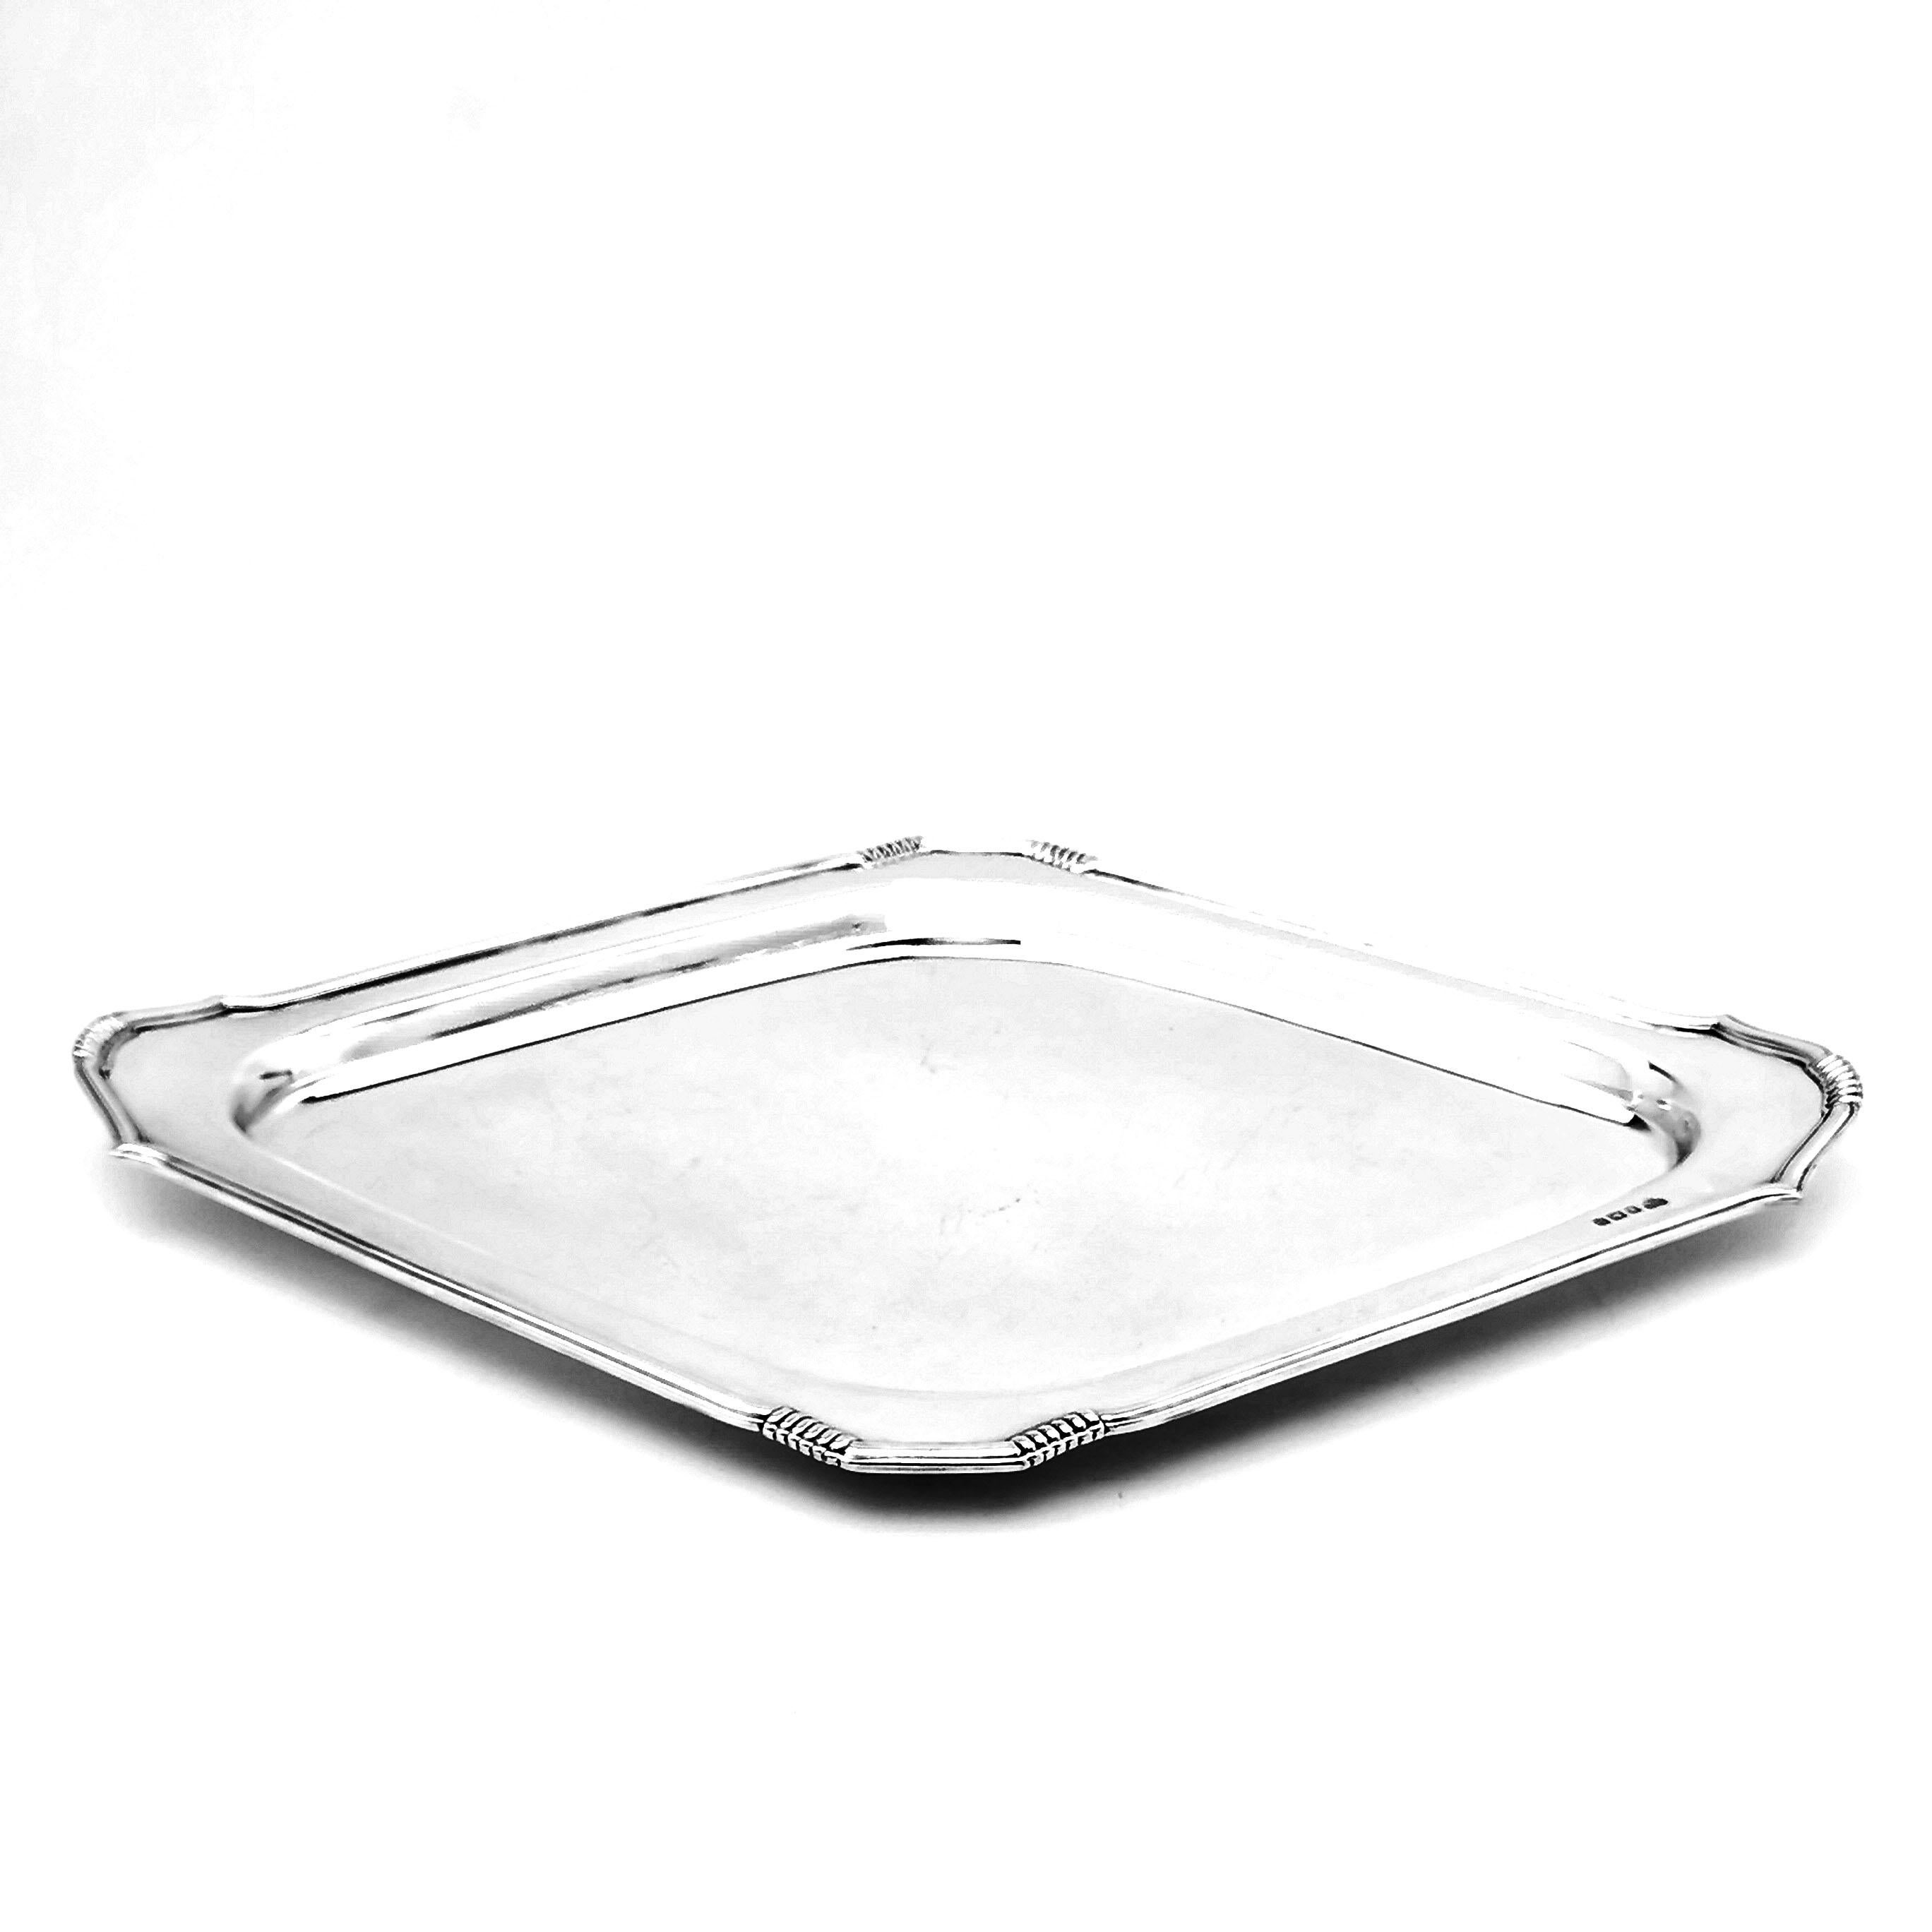 Set of 4 Sterling Silver Art Deco Serving Platters / Trays / Salvers 1956 1